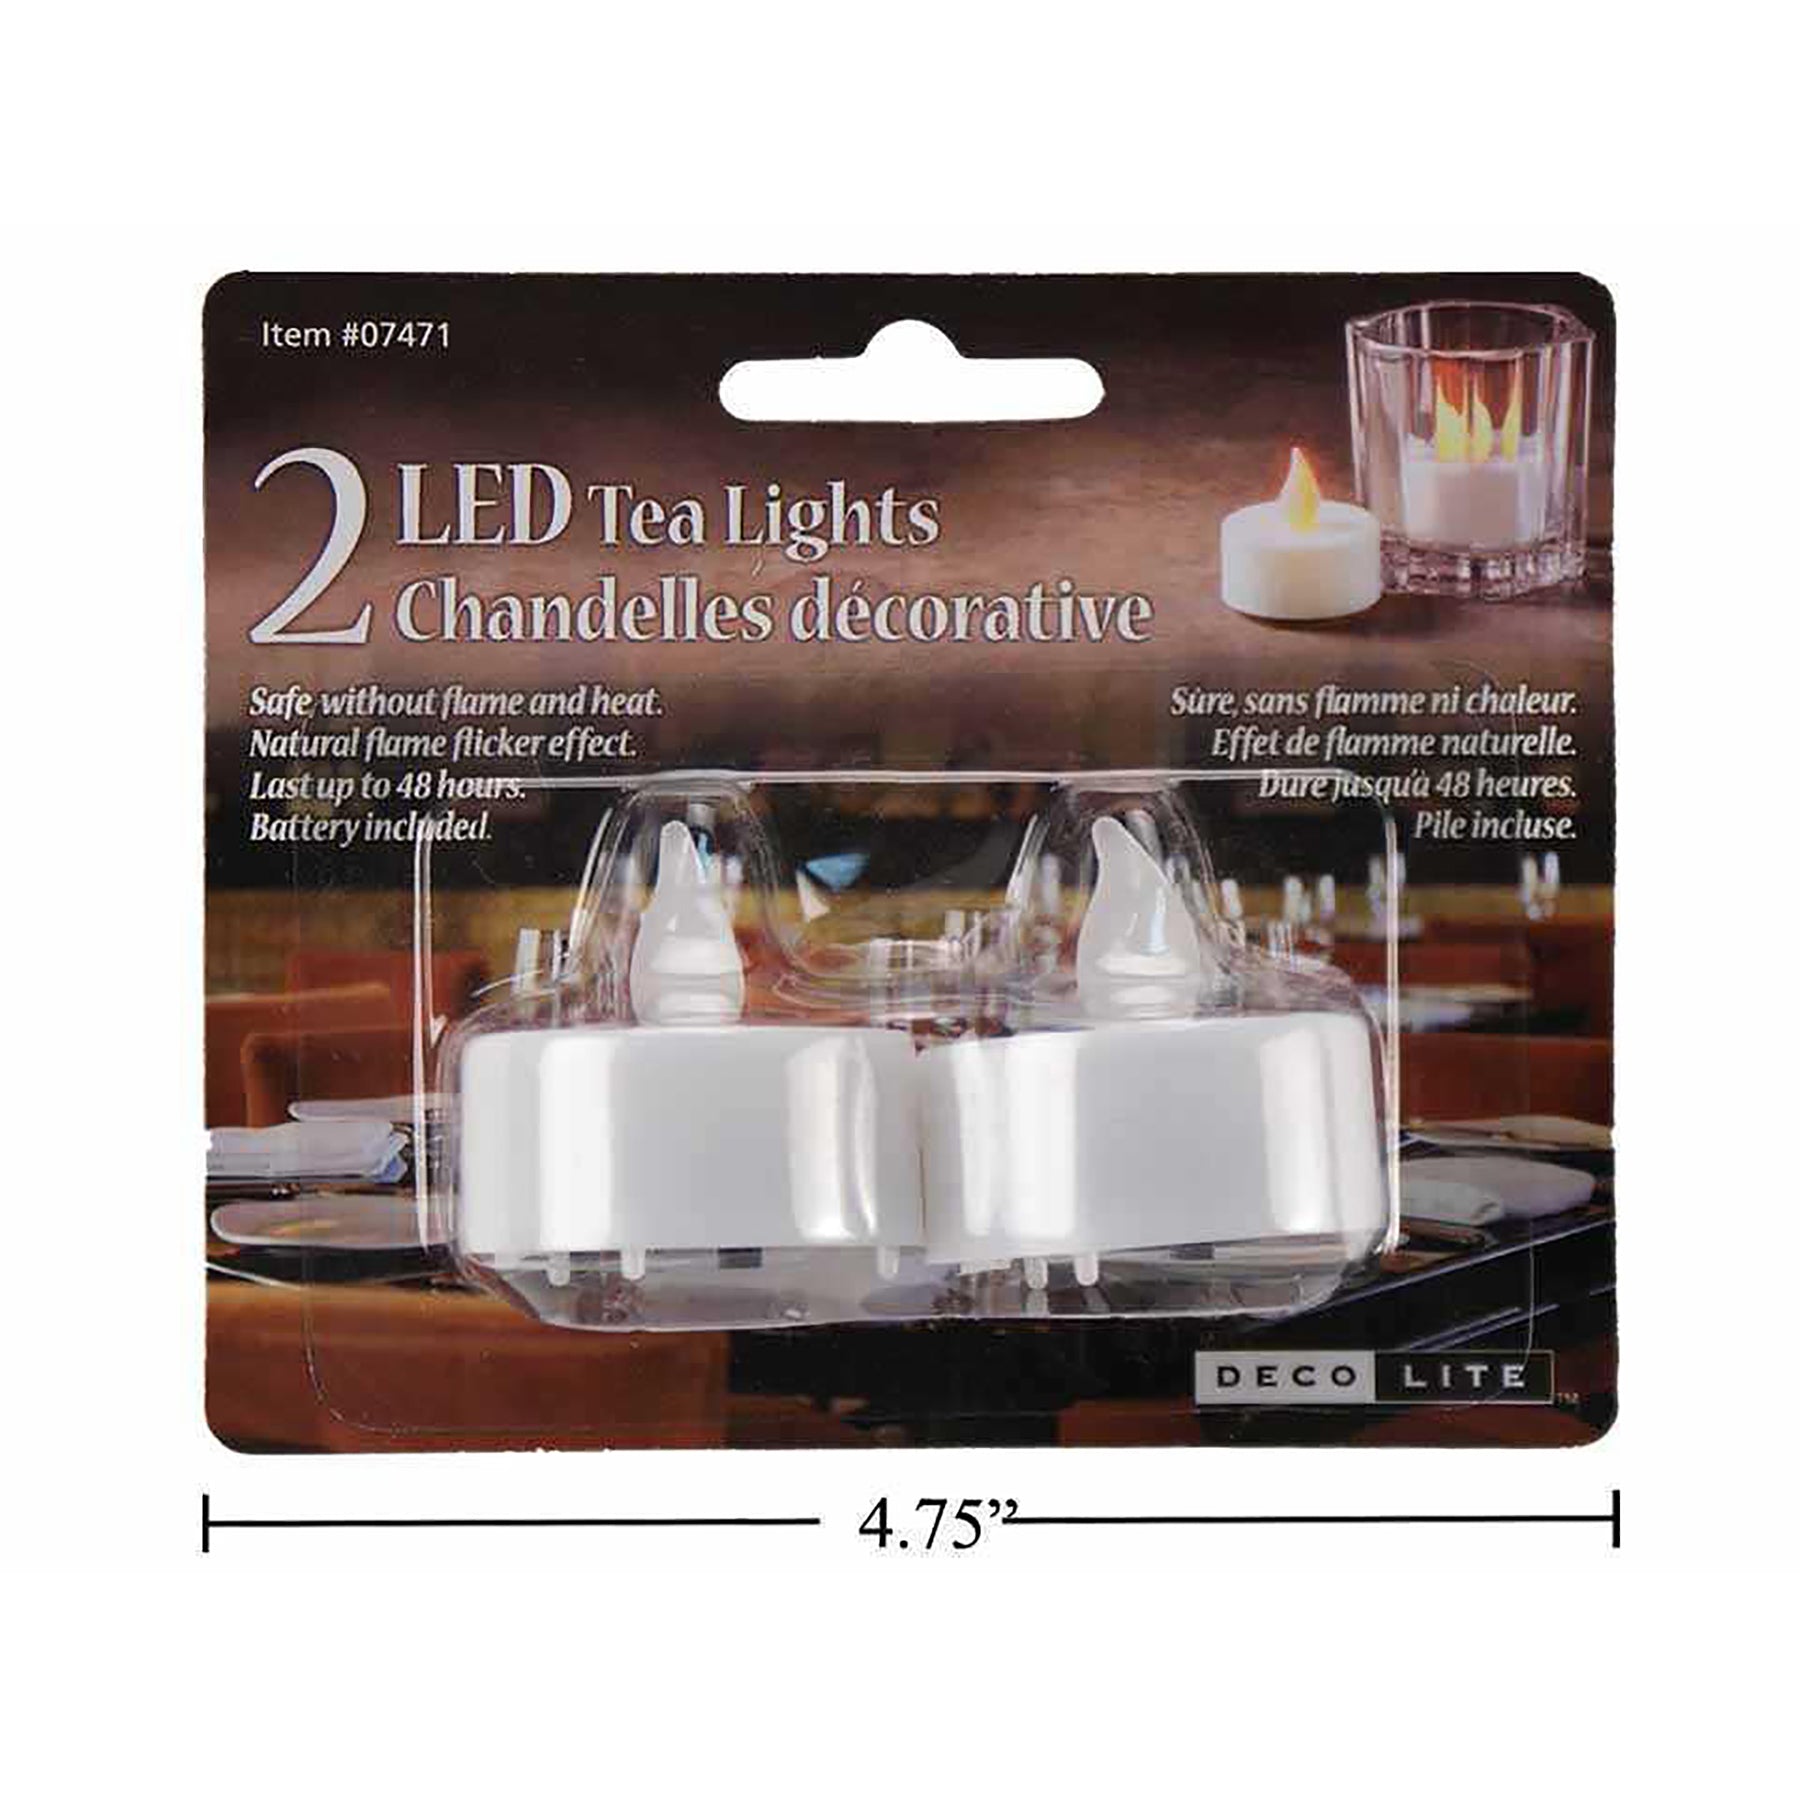 Deco Lite 2 LED Tealights Flickering Light with Batteries 1.5x1.4in